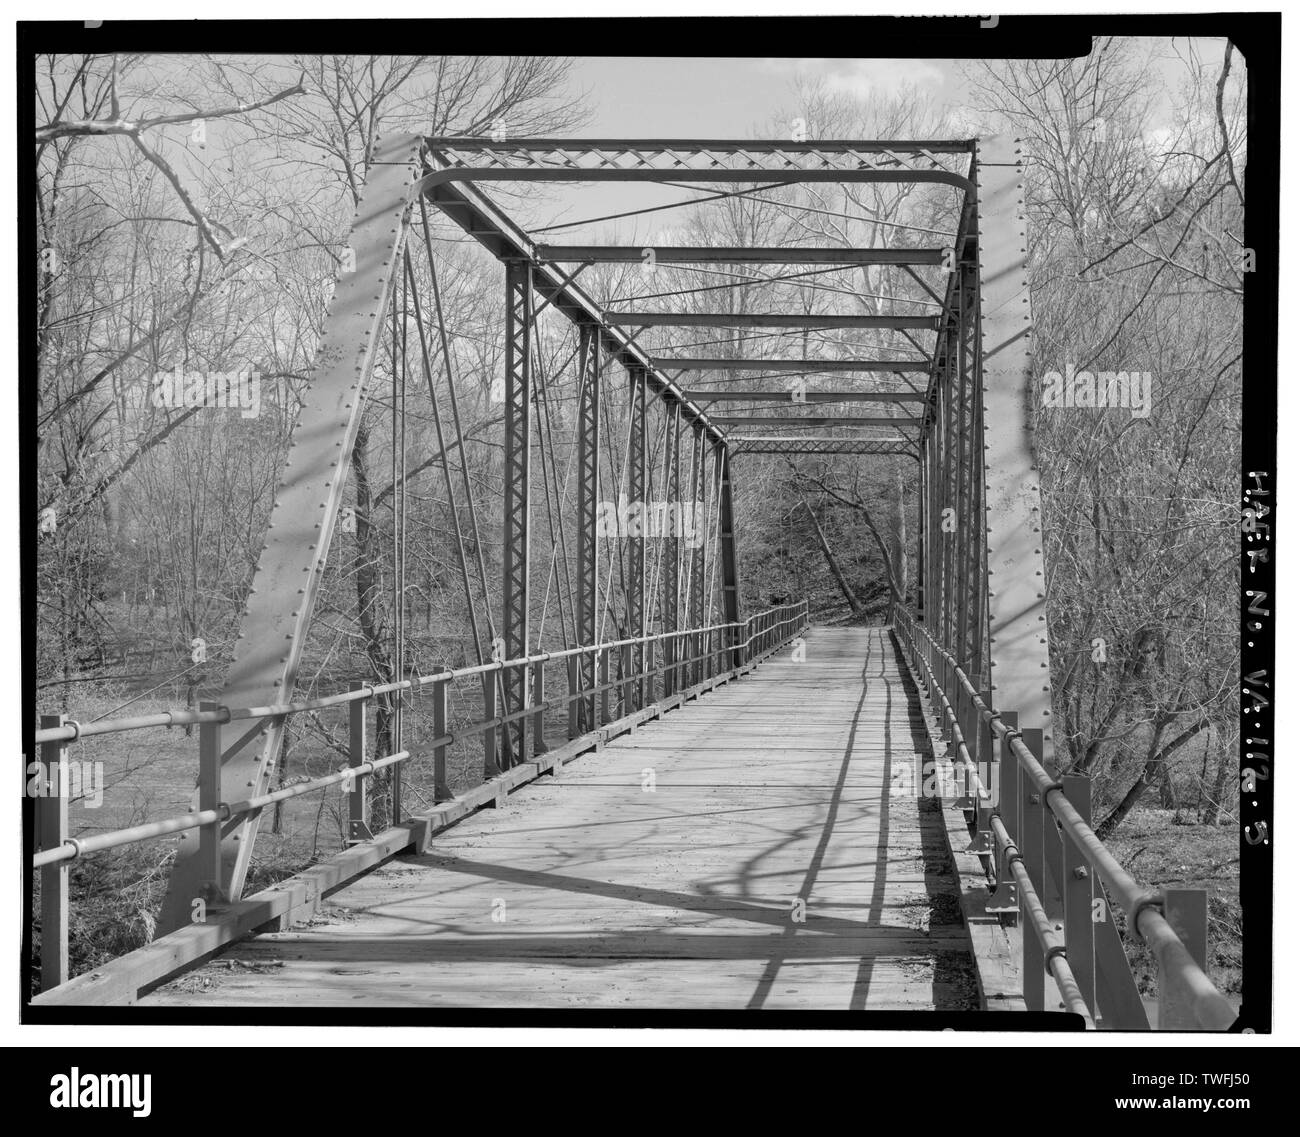 PORTAL AND DECK, VIEW NORTH - Waterloo Bridge, Spanning Rappahannock River at State Route 613, Waterloo, Fauquier County, VA; Virginia Bridge and Iron Company Stock Photo